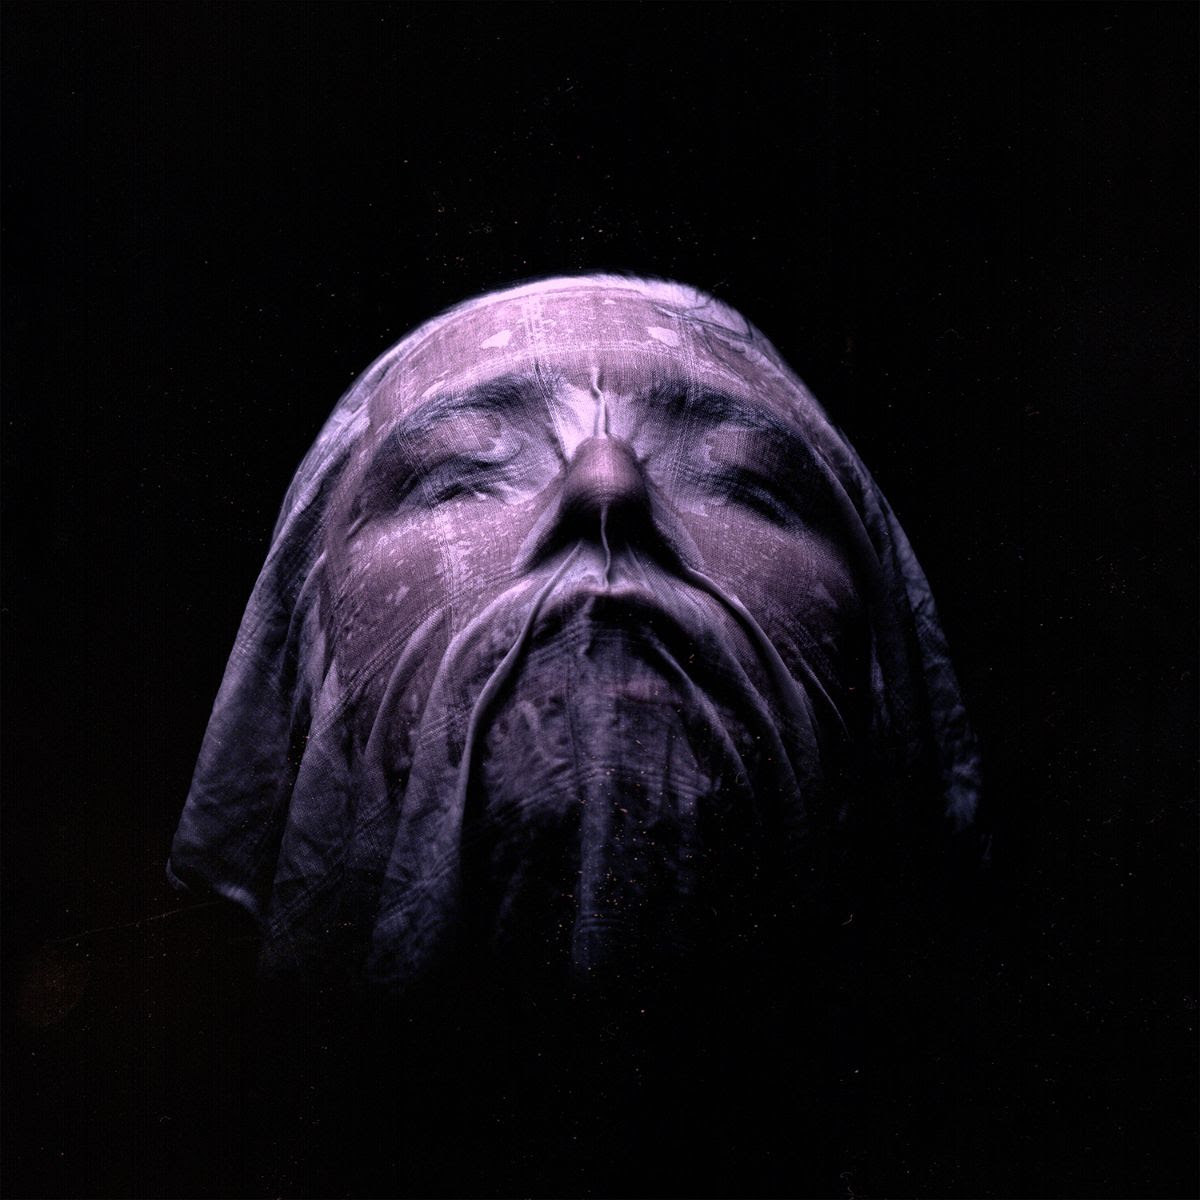 Numenorean Give Us Much To “Adore”